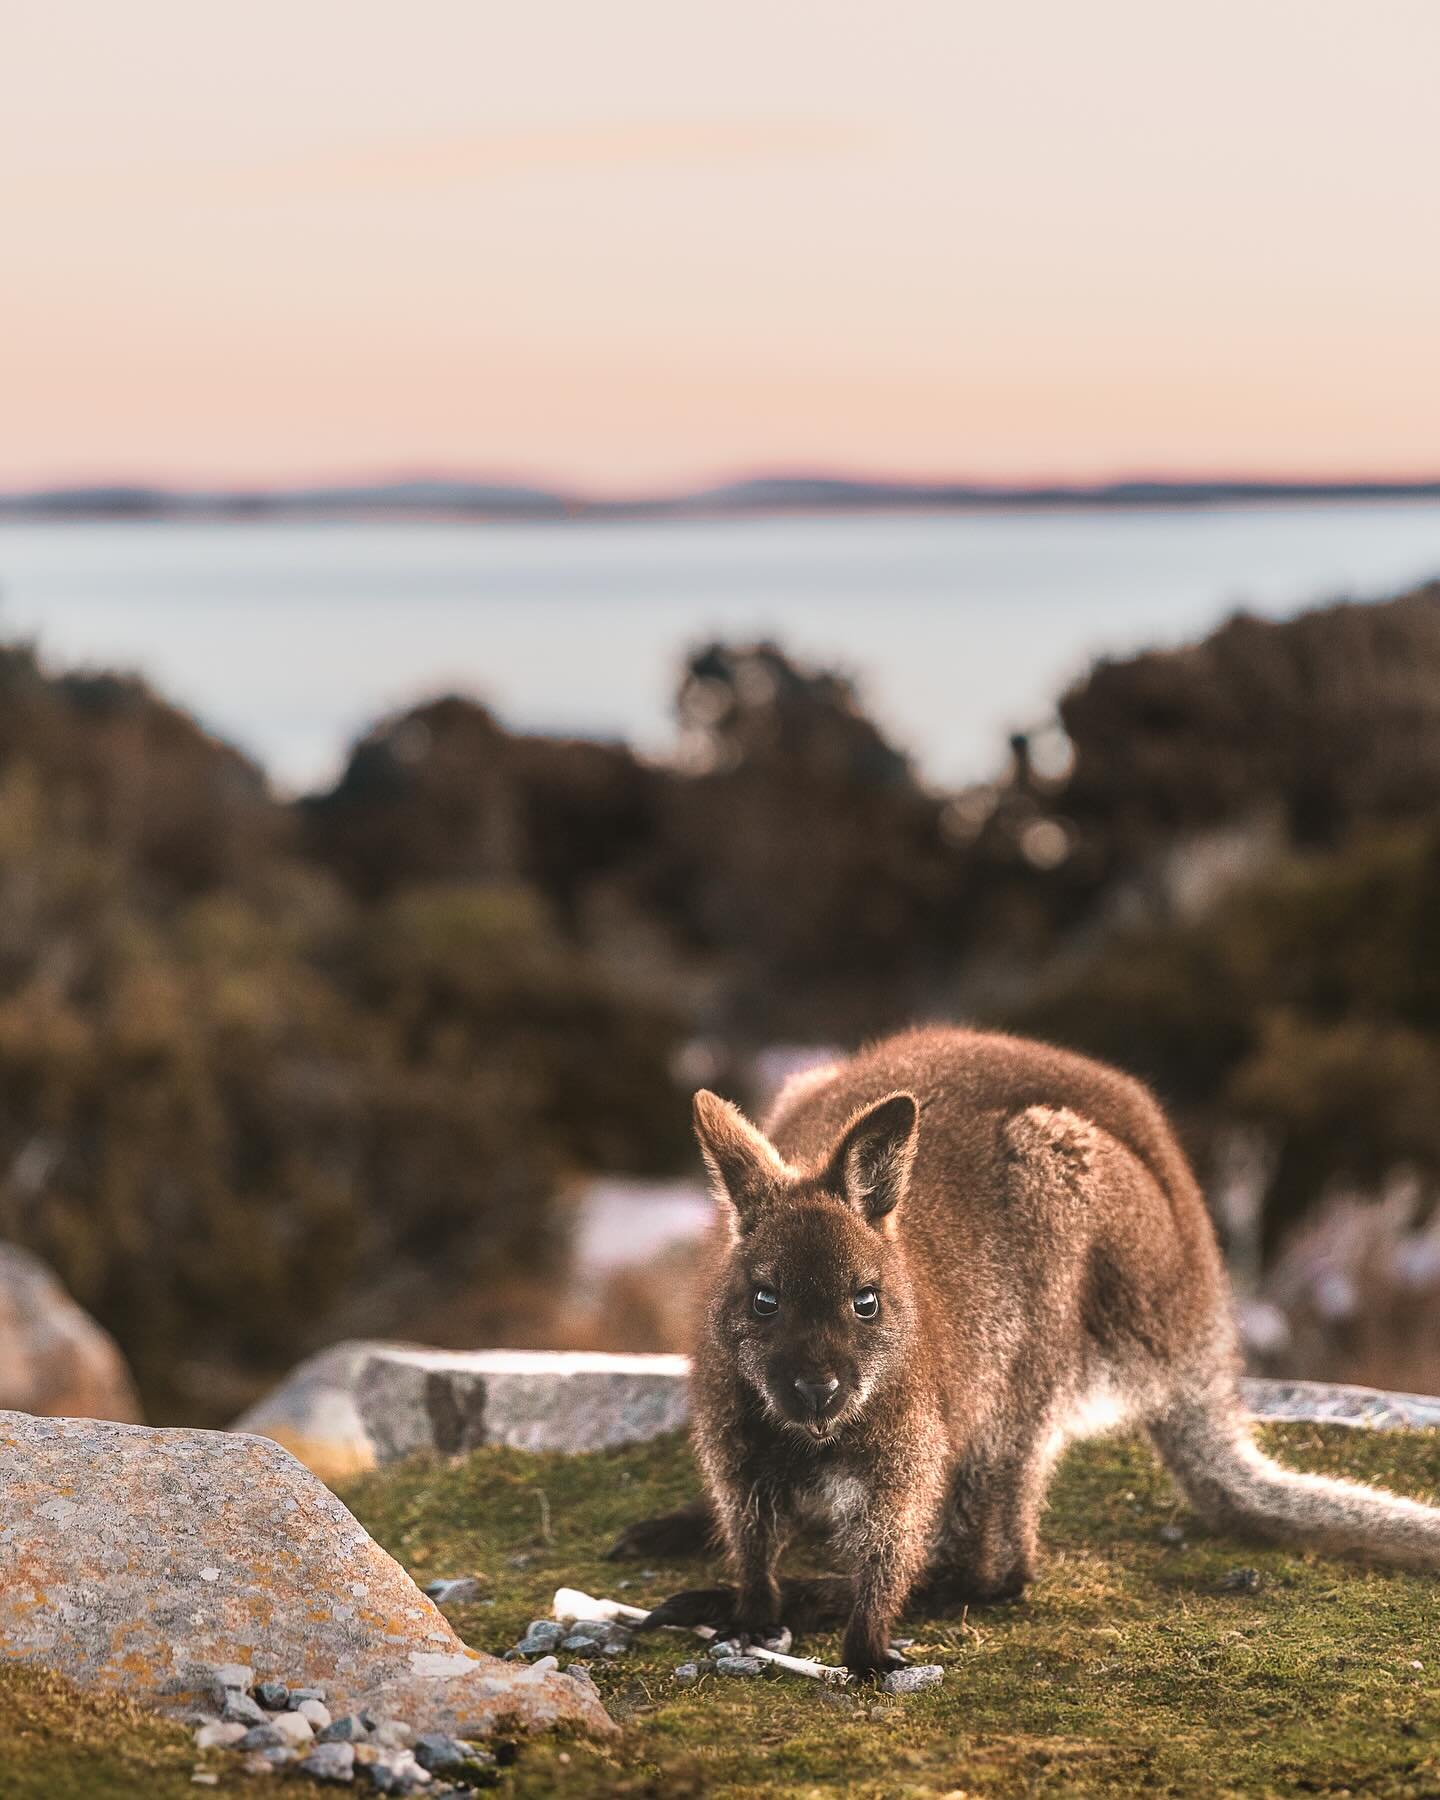 Pastel skies, curious wallabies and calm waters across the Great Lake. The perfect evening in the highlands.